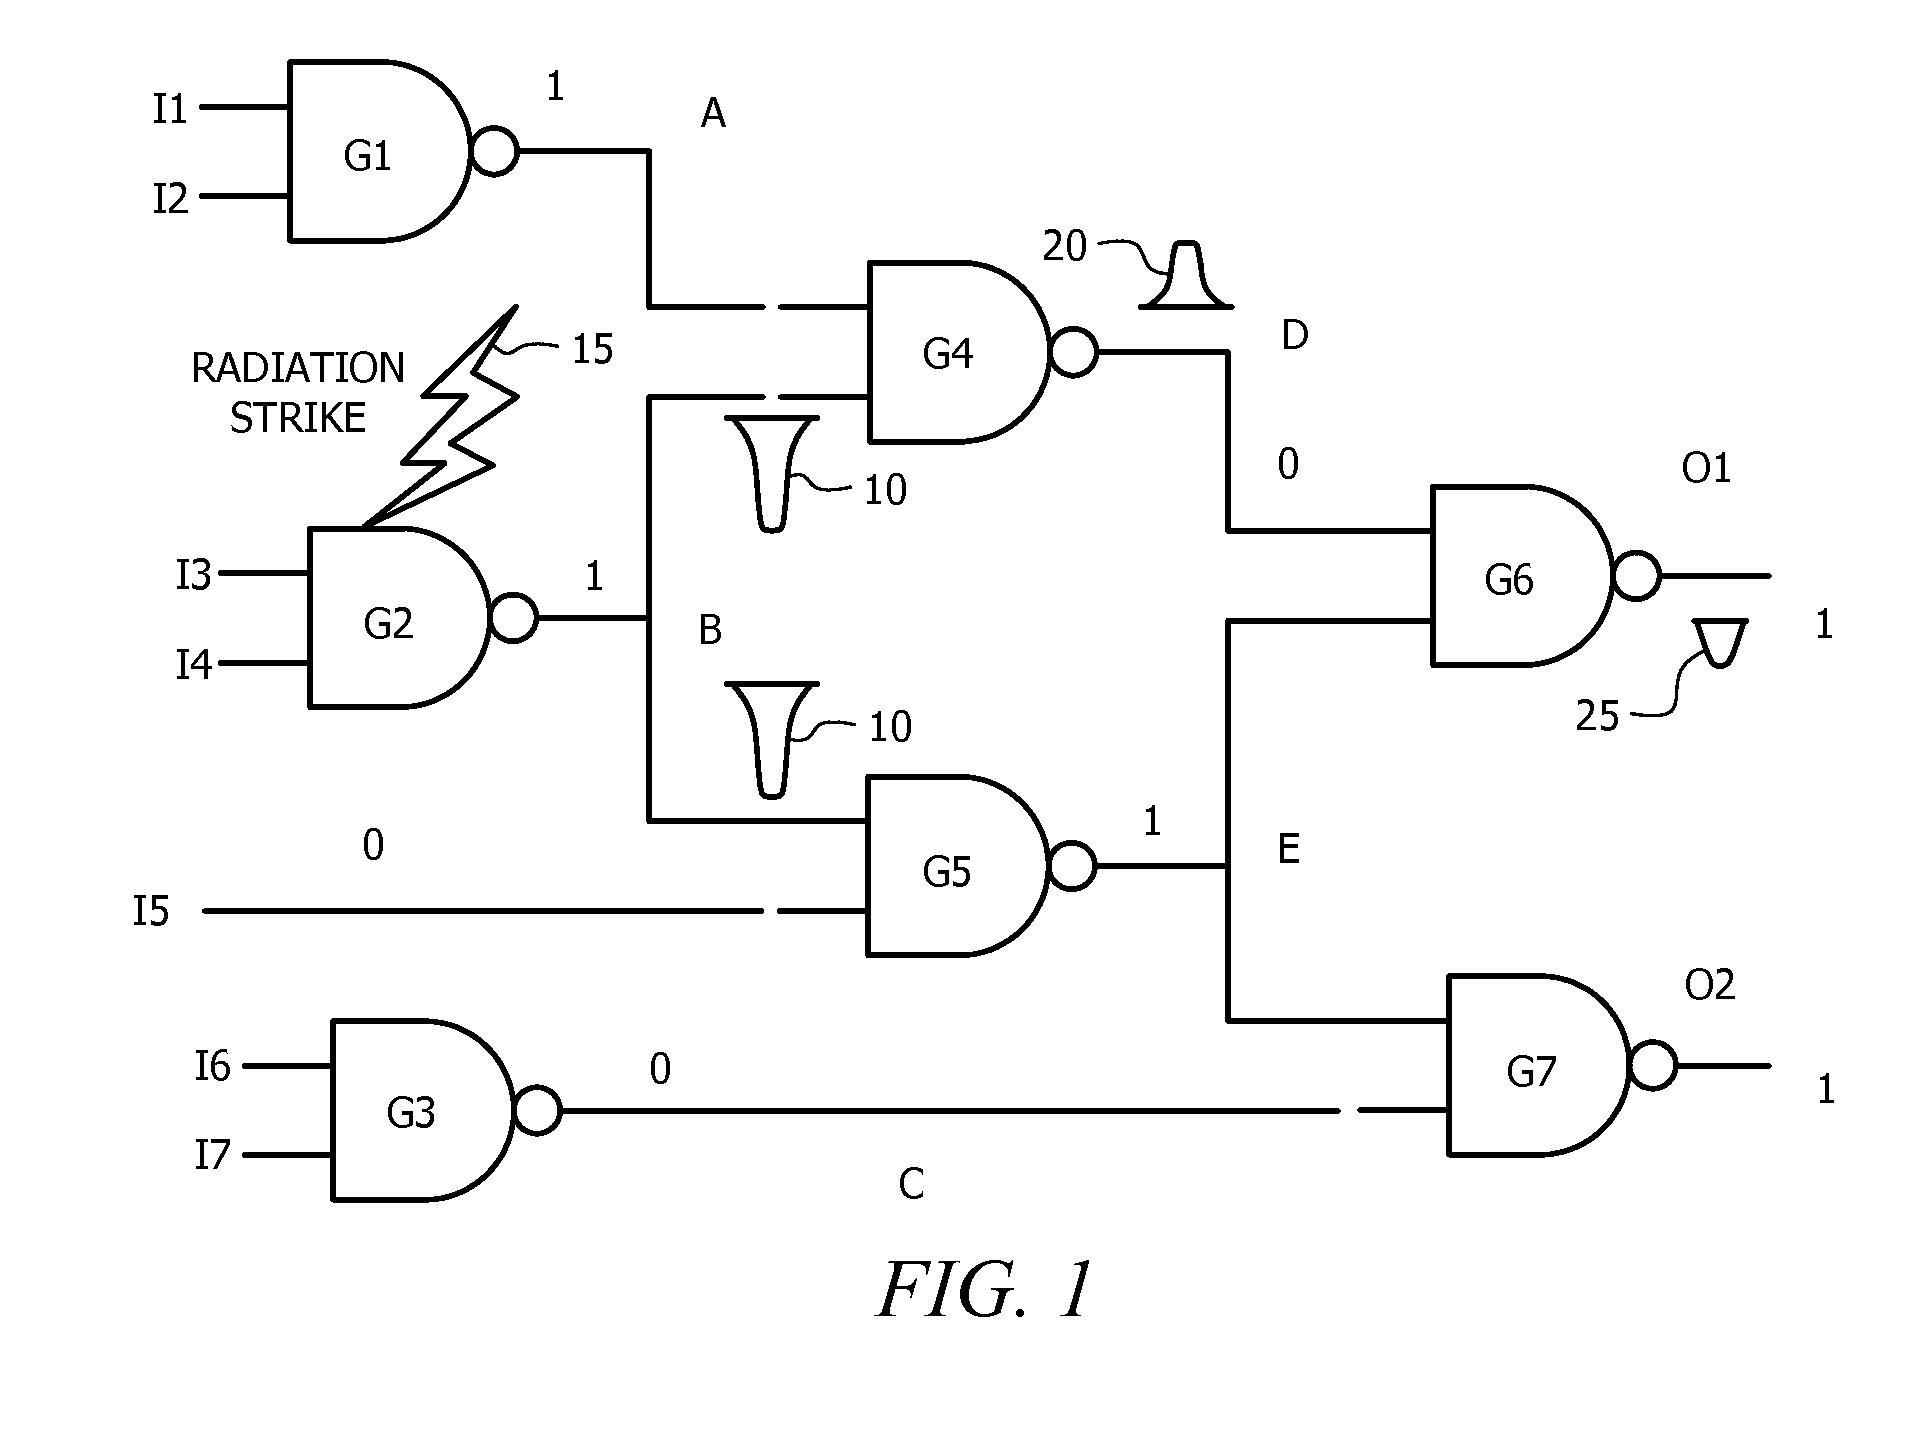 Methodology and Apparatus for Reduction of Soft Errors in Logic Circuits